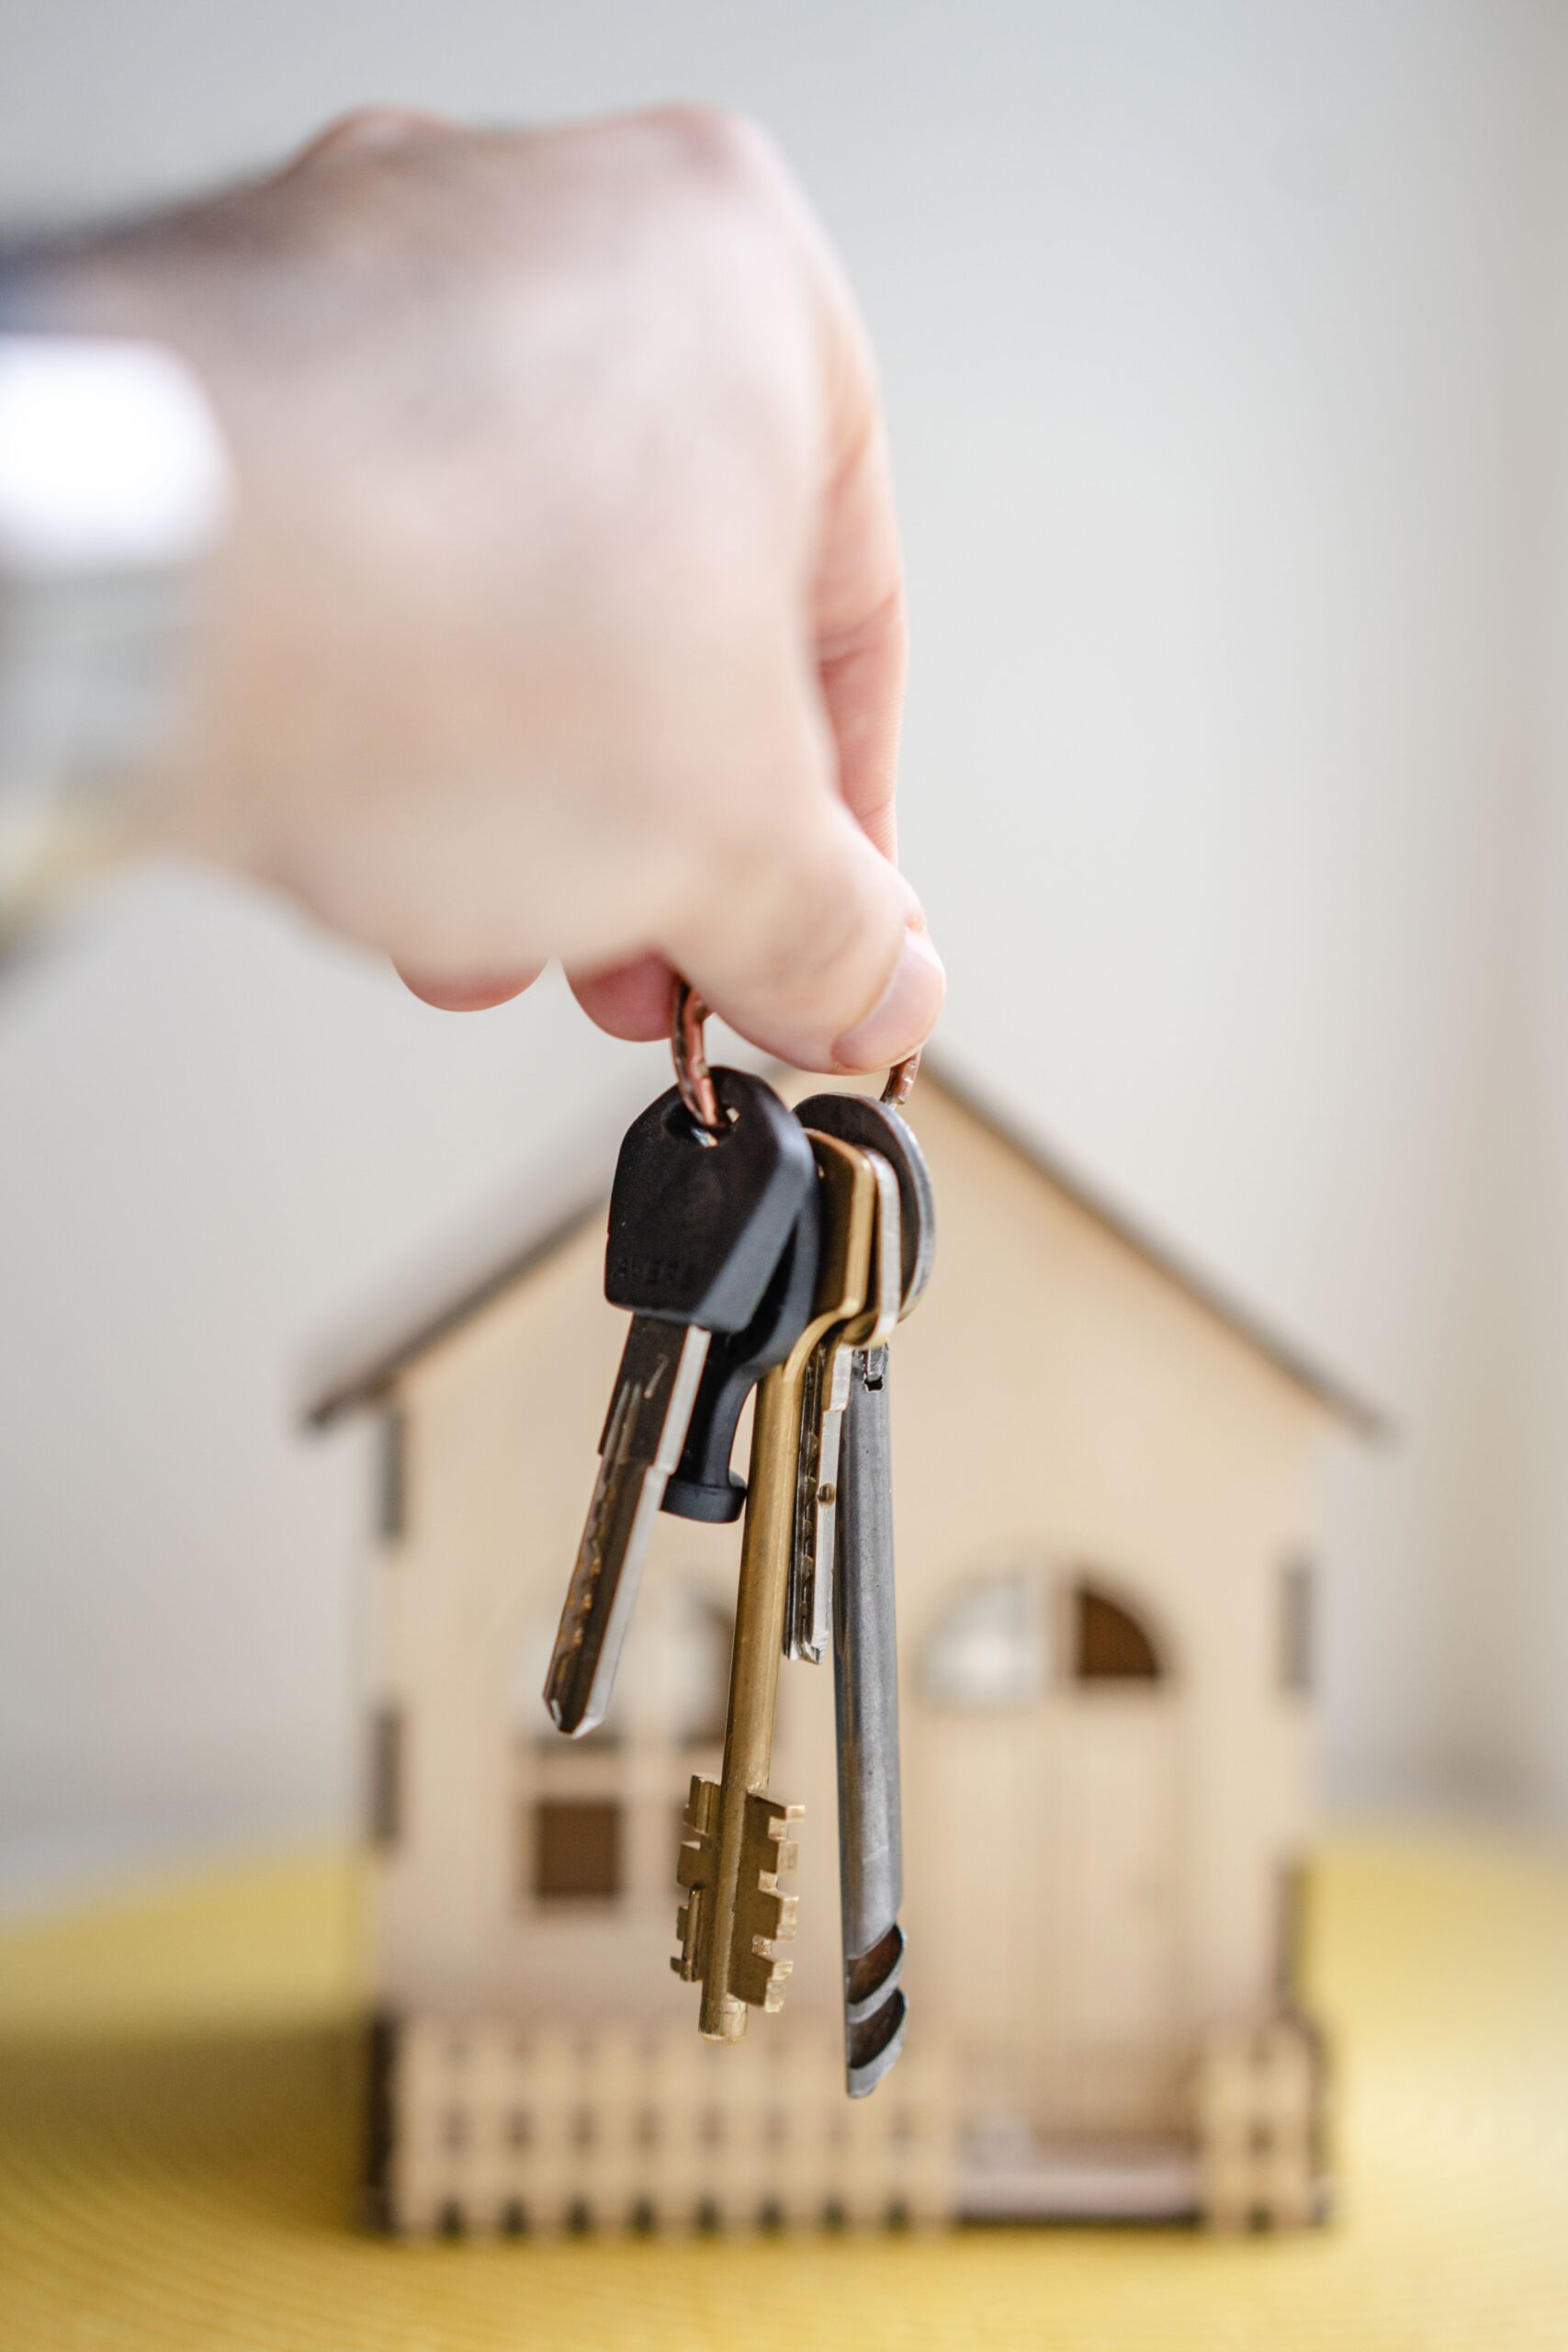 A person holding a key in front of a wooden house image